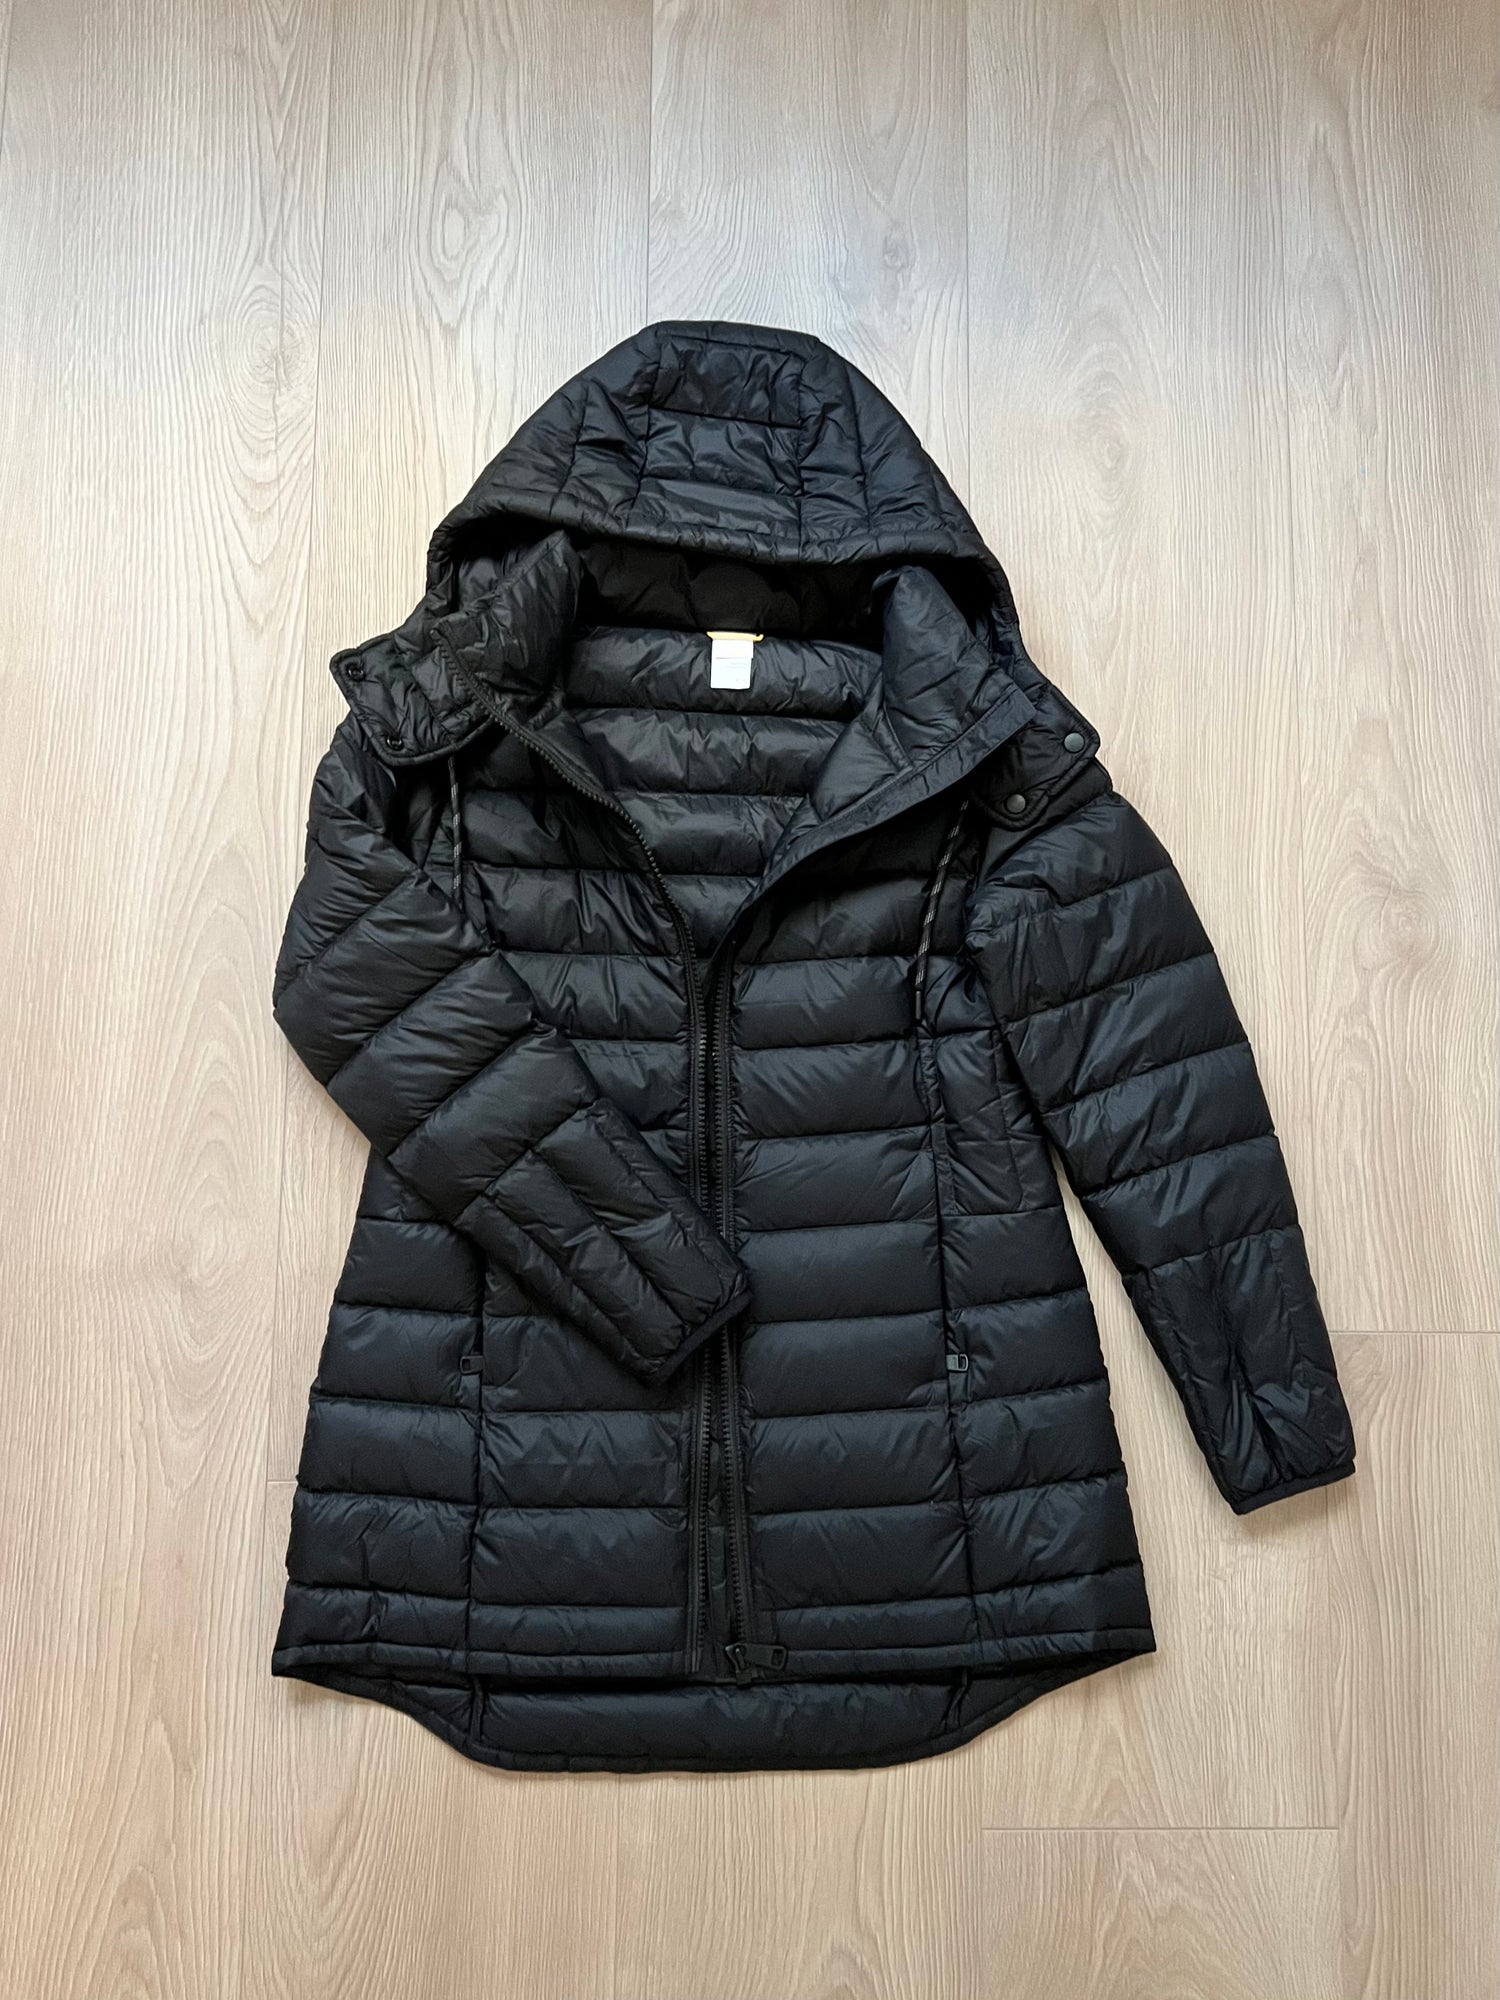 Pre owned Lole light weight down jacket